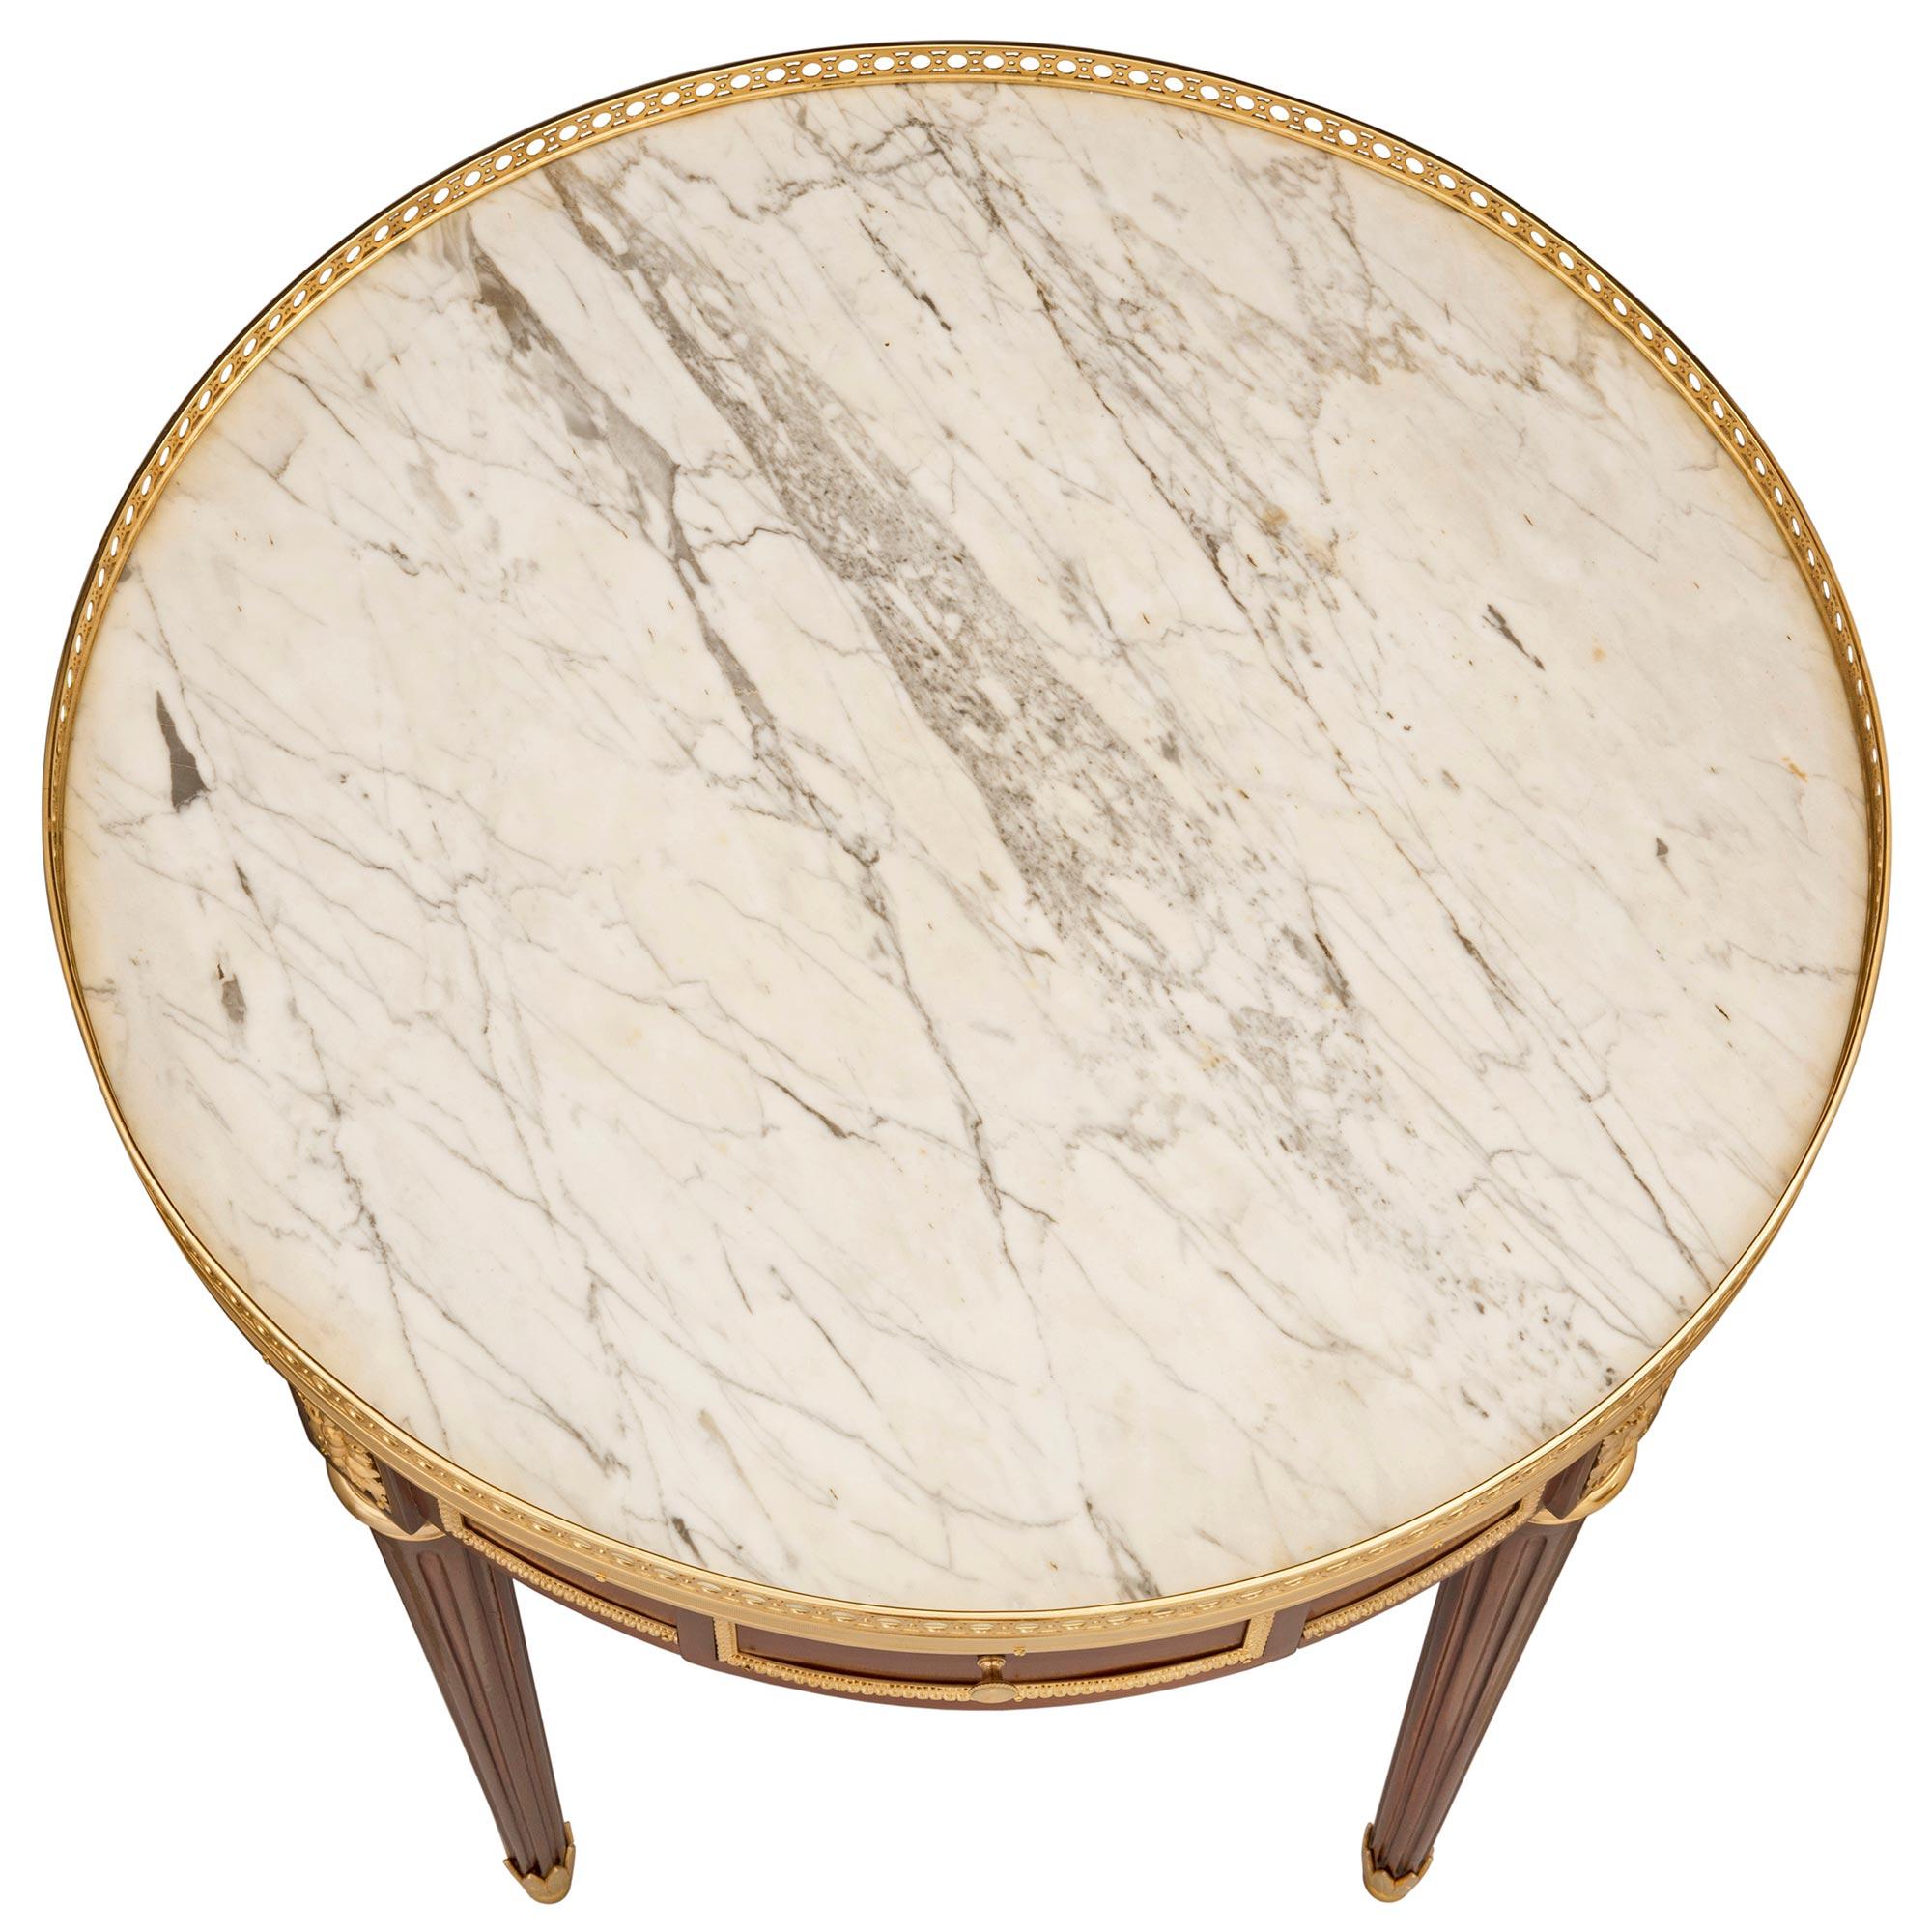 An elegant French 19th century Louis XVI st. mahogany, ormolu, and white Carrara marble side table, attributed to Krieger. The table is raised by fine circular tapered fluted legs with beautifully fitted palmette-designed ormolu sabots and mottled